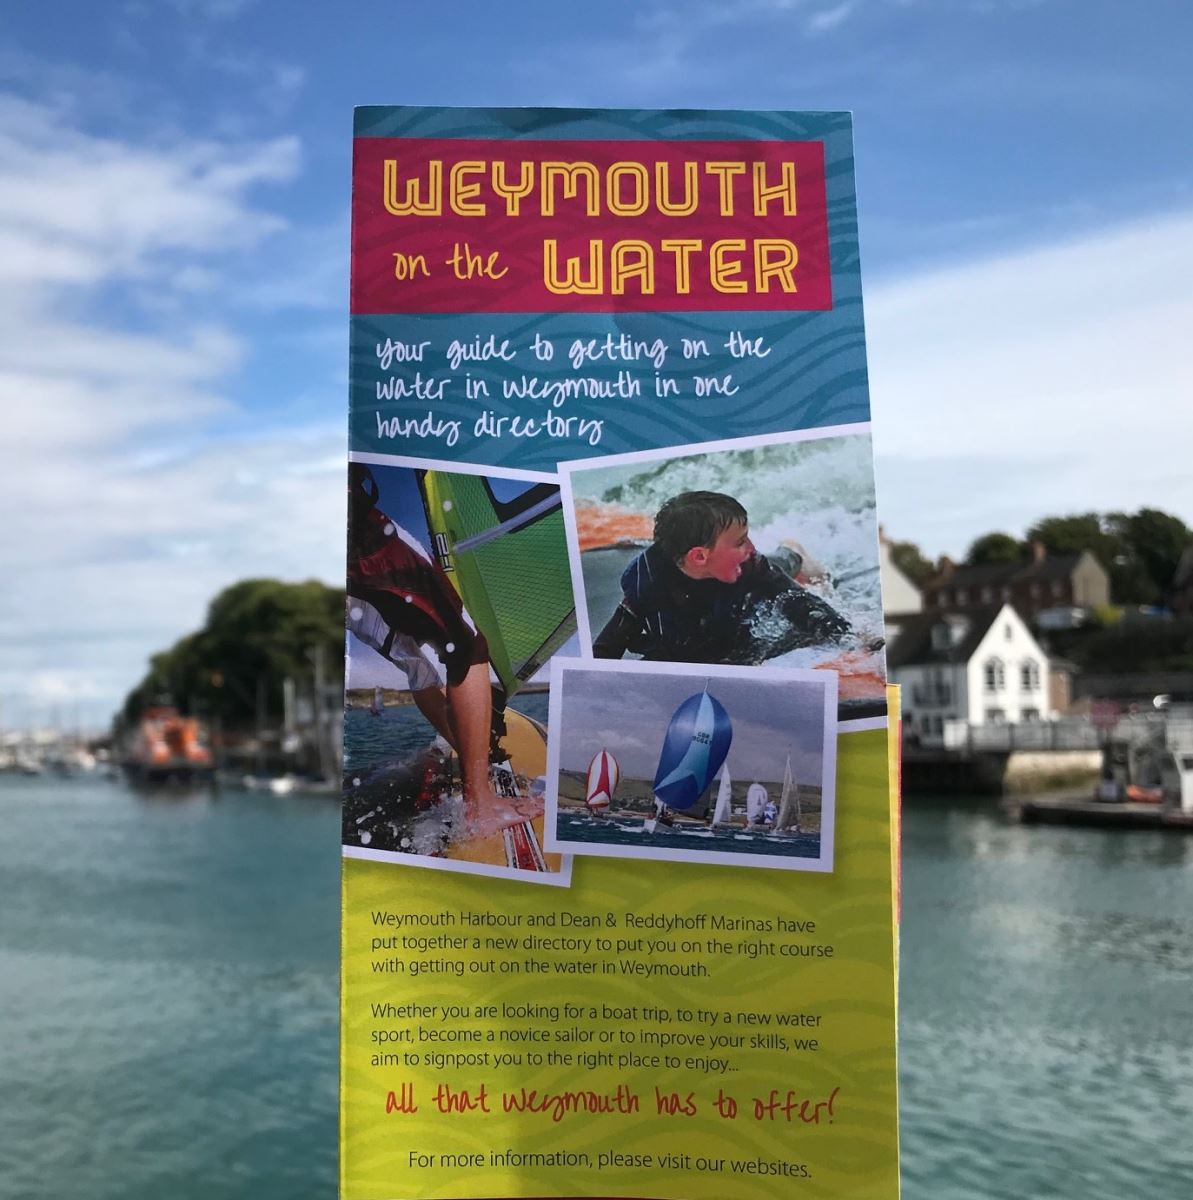 Weymouth on the Water